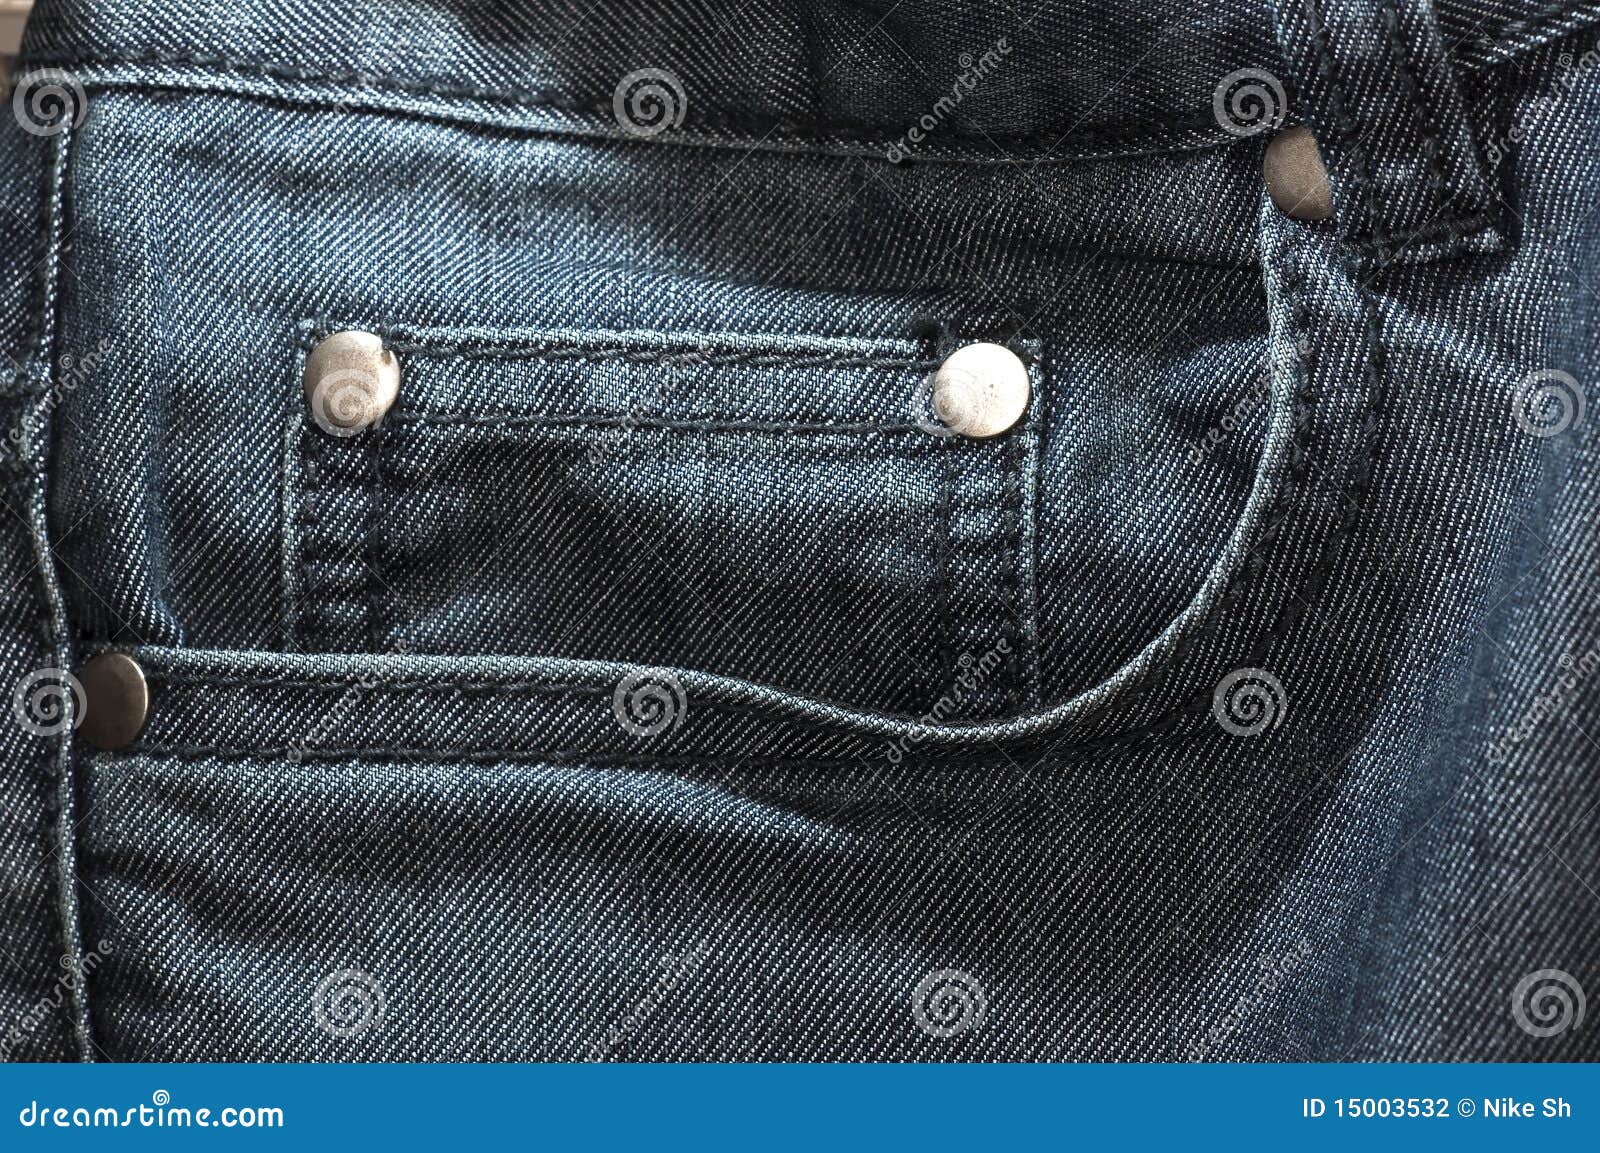 Jeans pocket stock photo. Image of jeans, pocket, material - 15003532